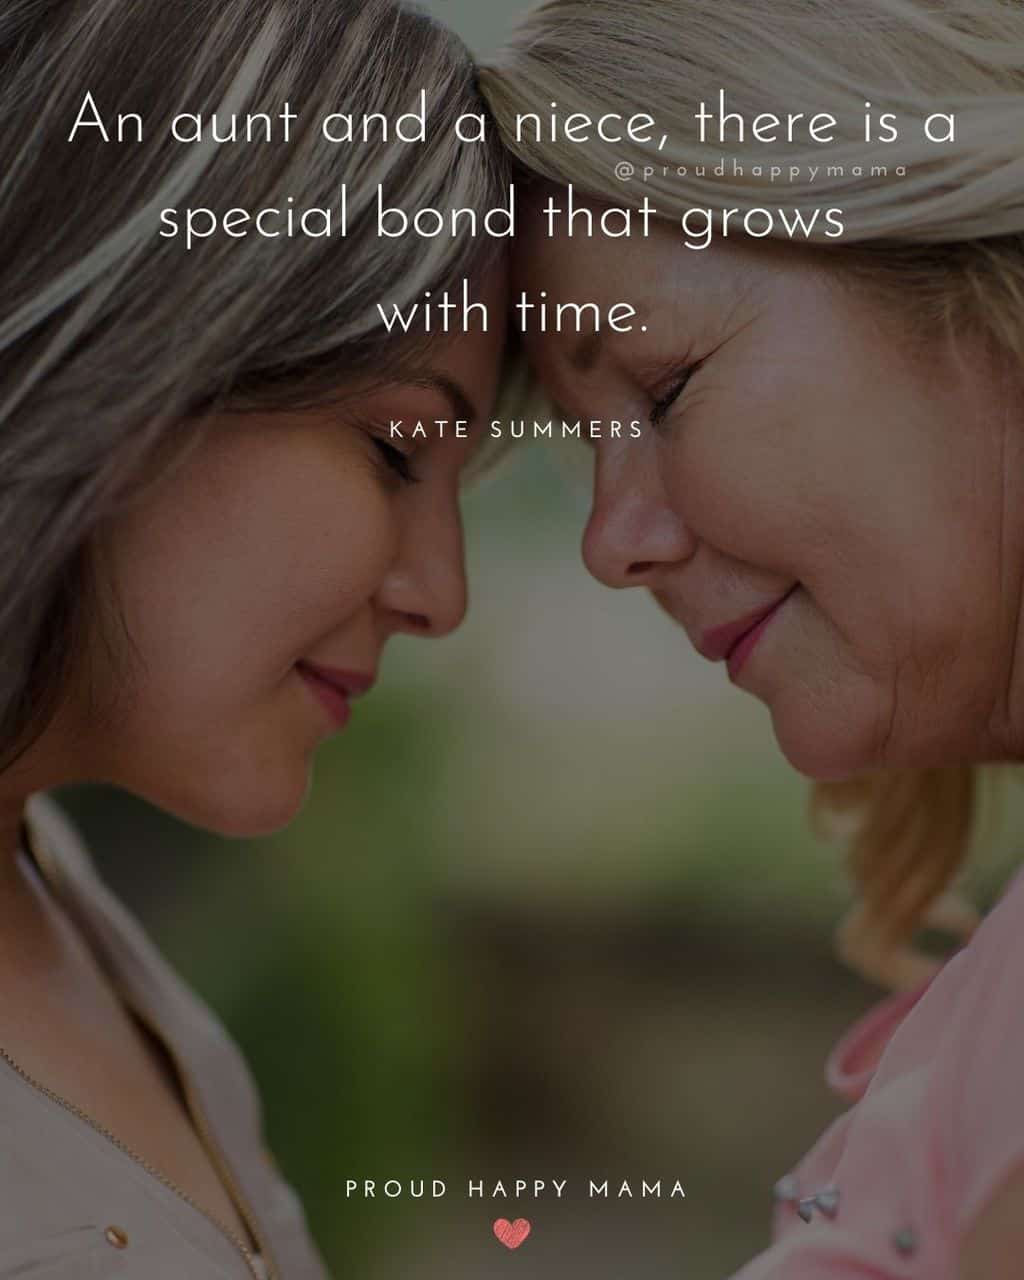 Niece Quotes - An aunt and a niece, there is a special bond that grows with time. Kate Summers